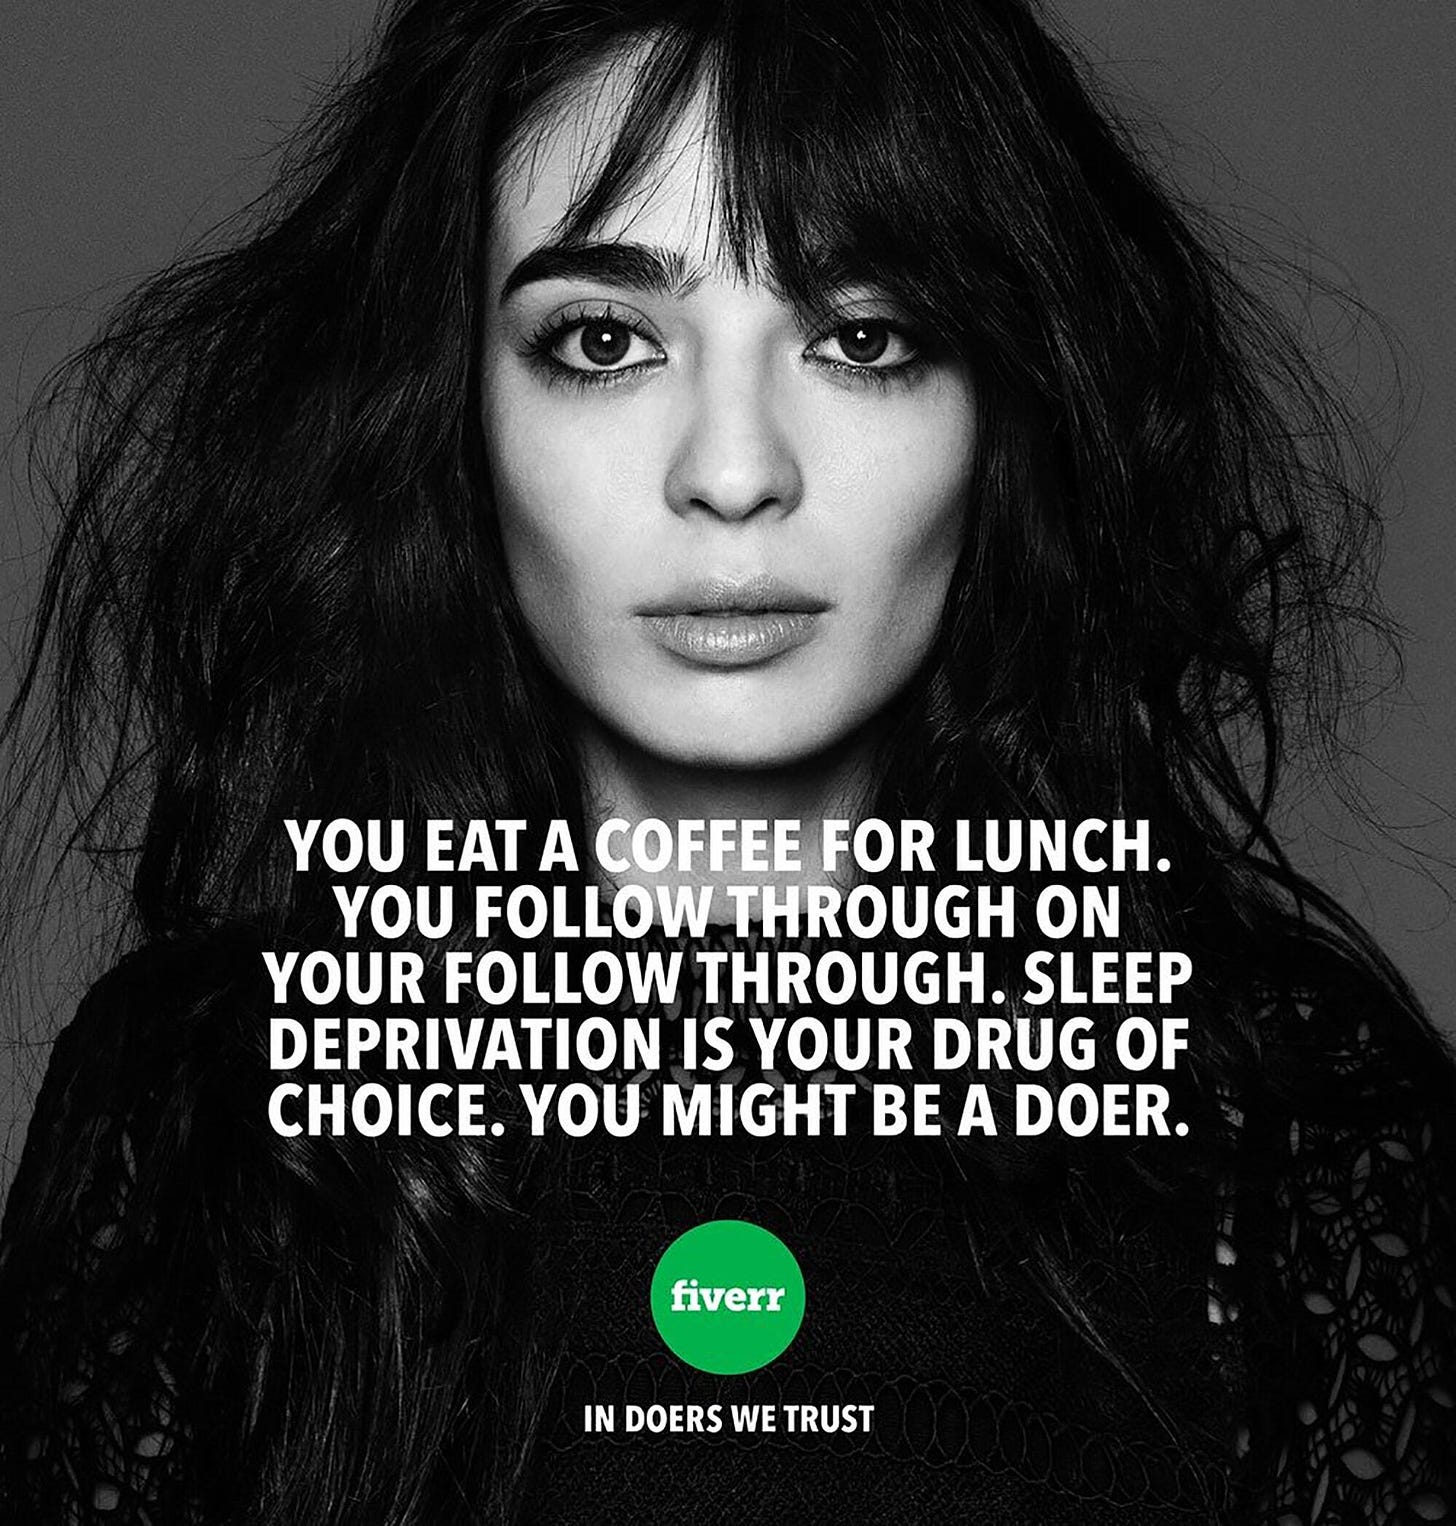 A black and white image of a frazzled woman staring blankly into the camera. The text below her reads you eat a coffee for lunch. you follow through on your follow through. sleep deprivation is your drug of choice. you might be a doer.